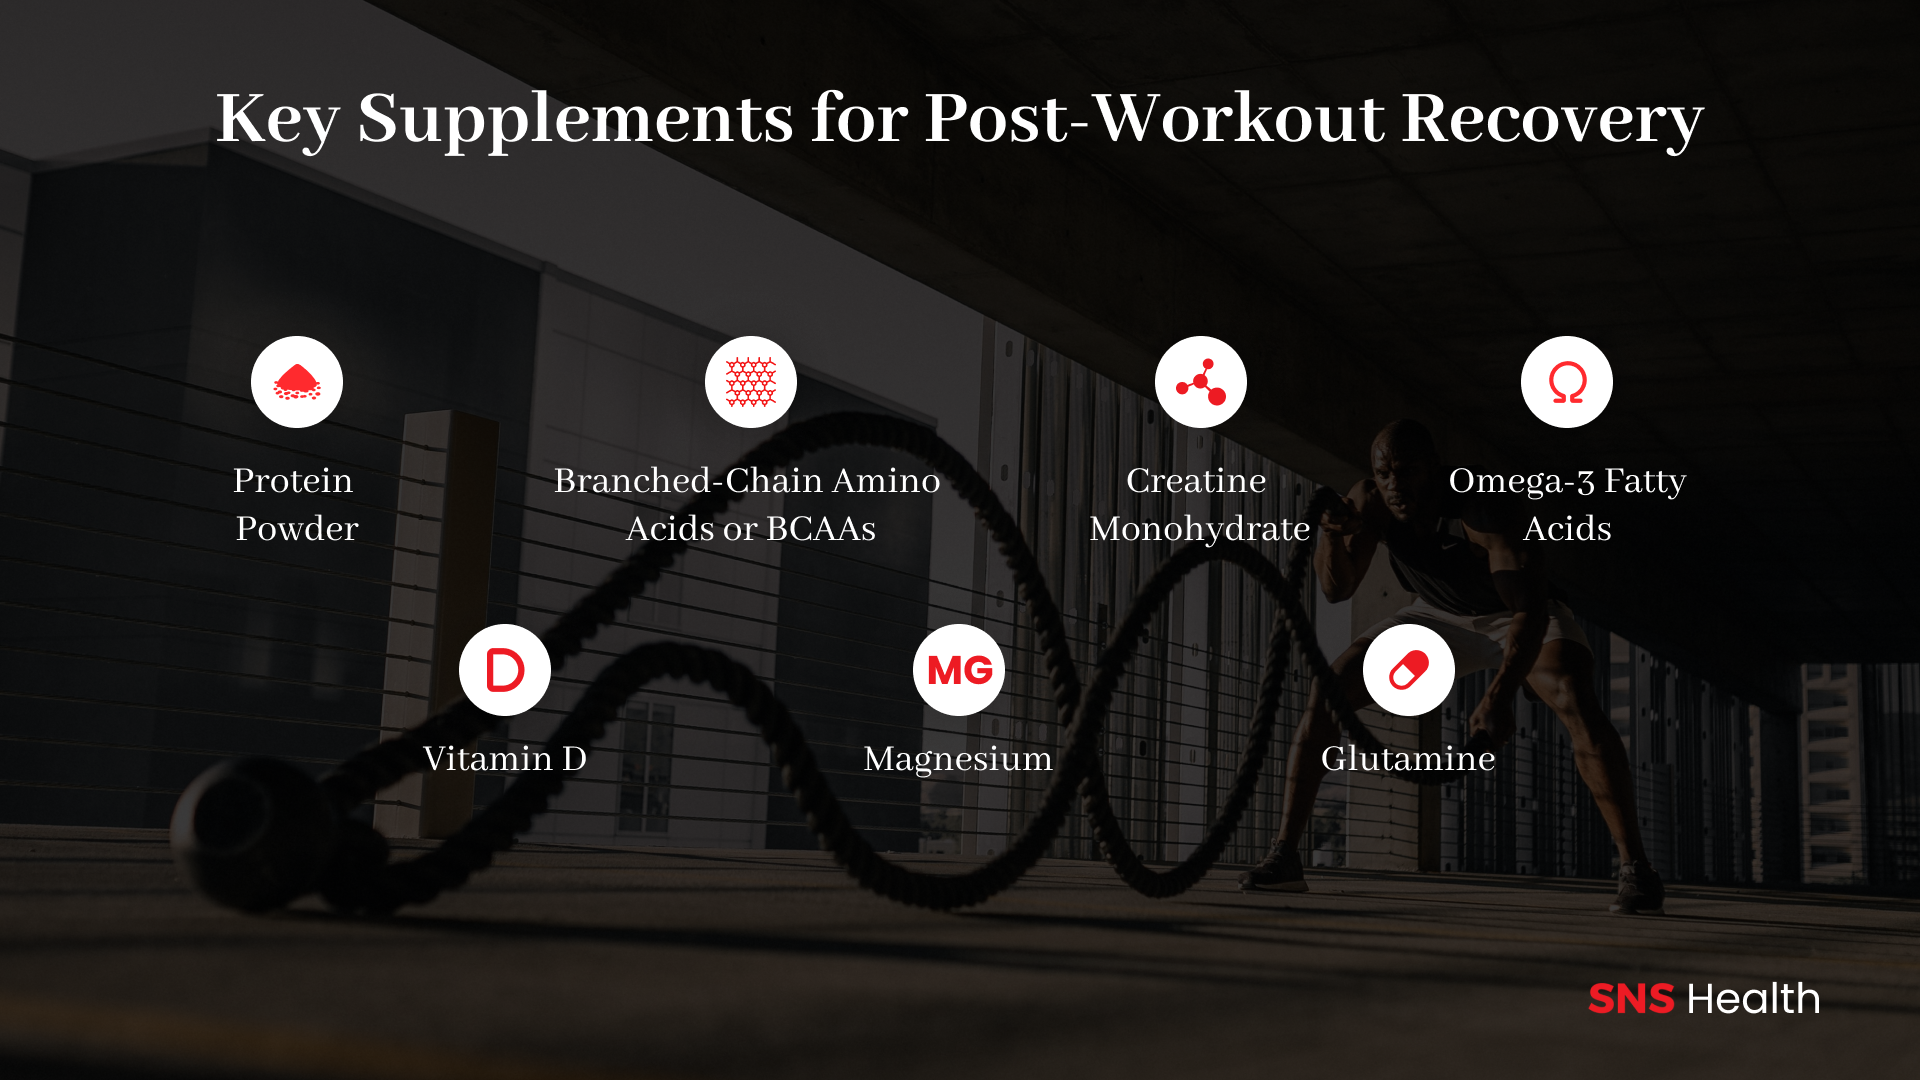 Key Supplements for Post-Workout Recovery